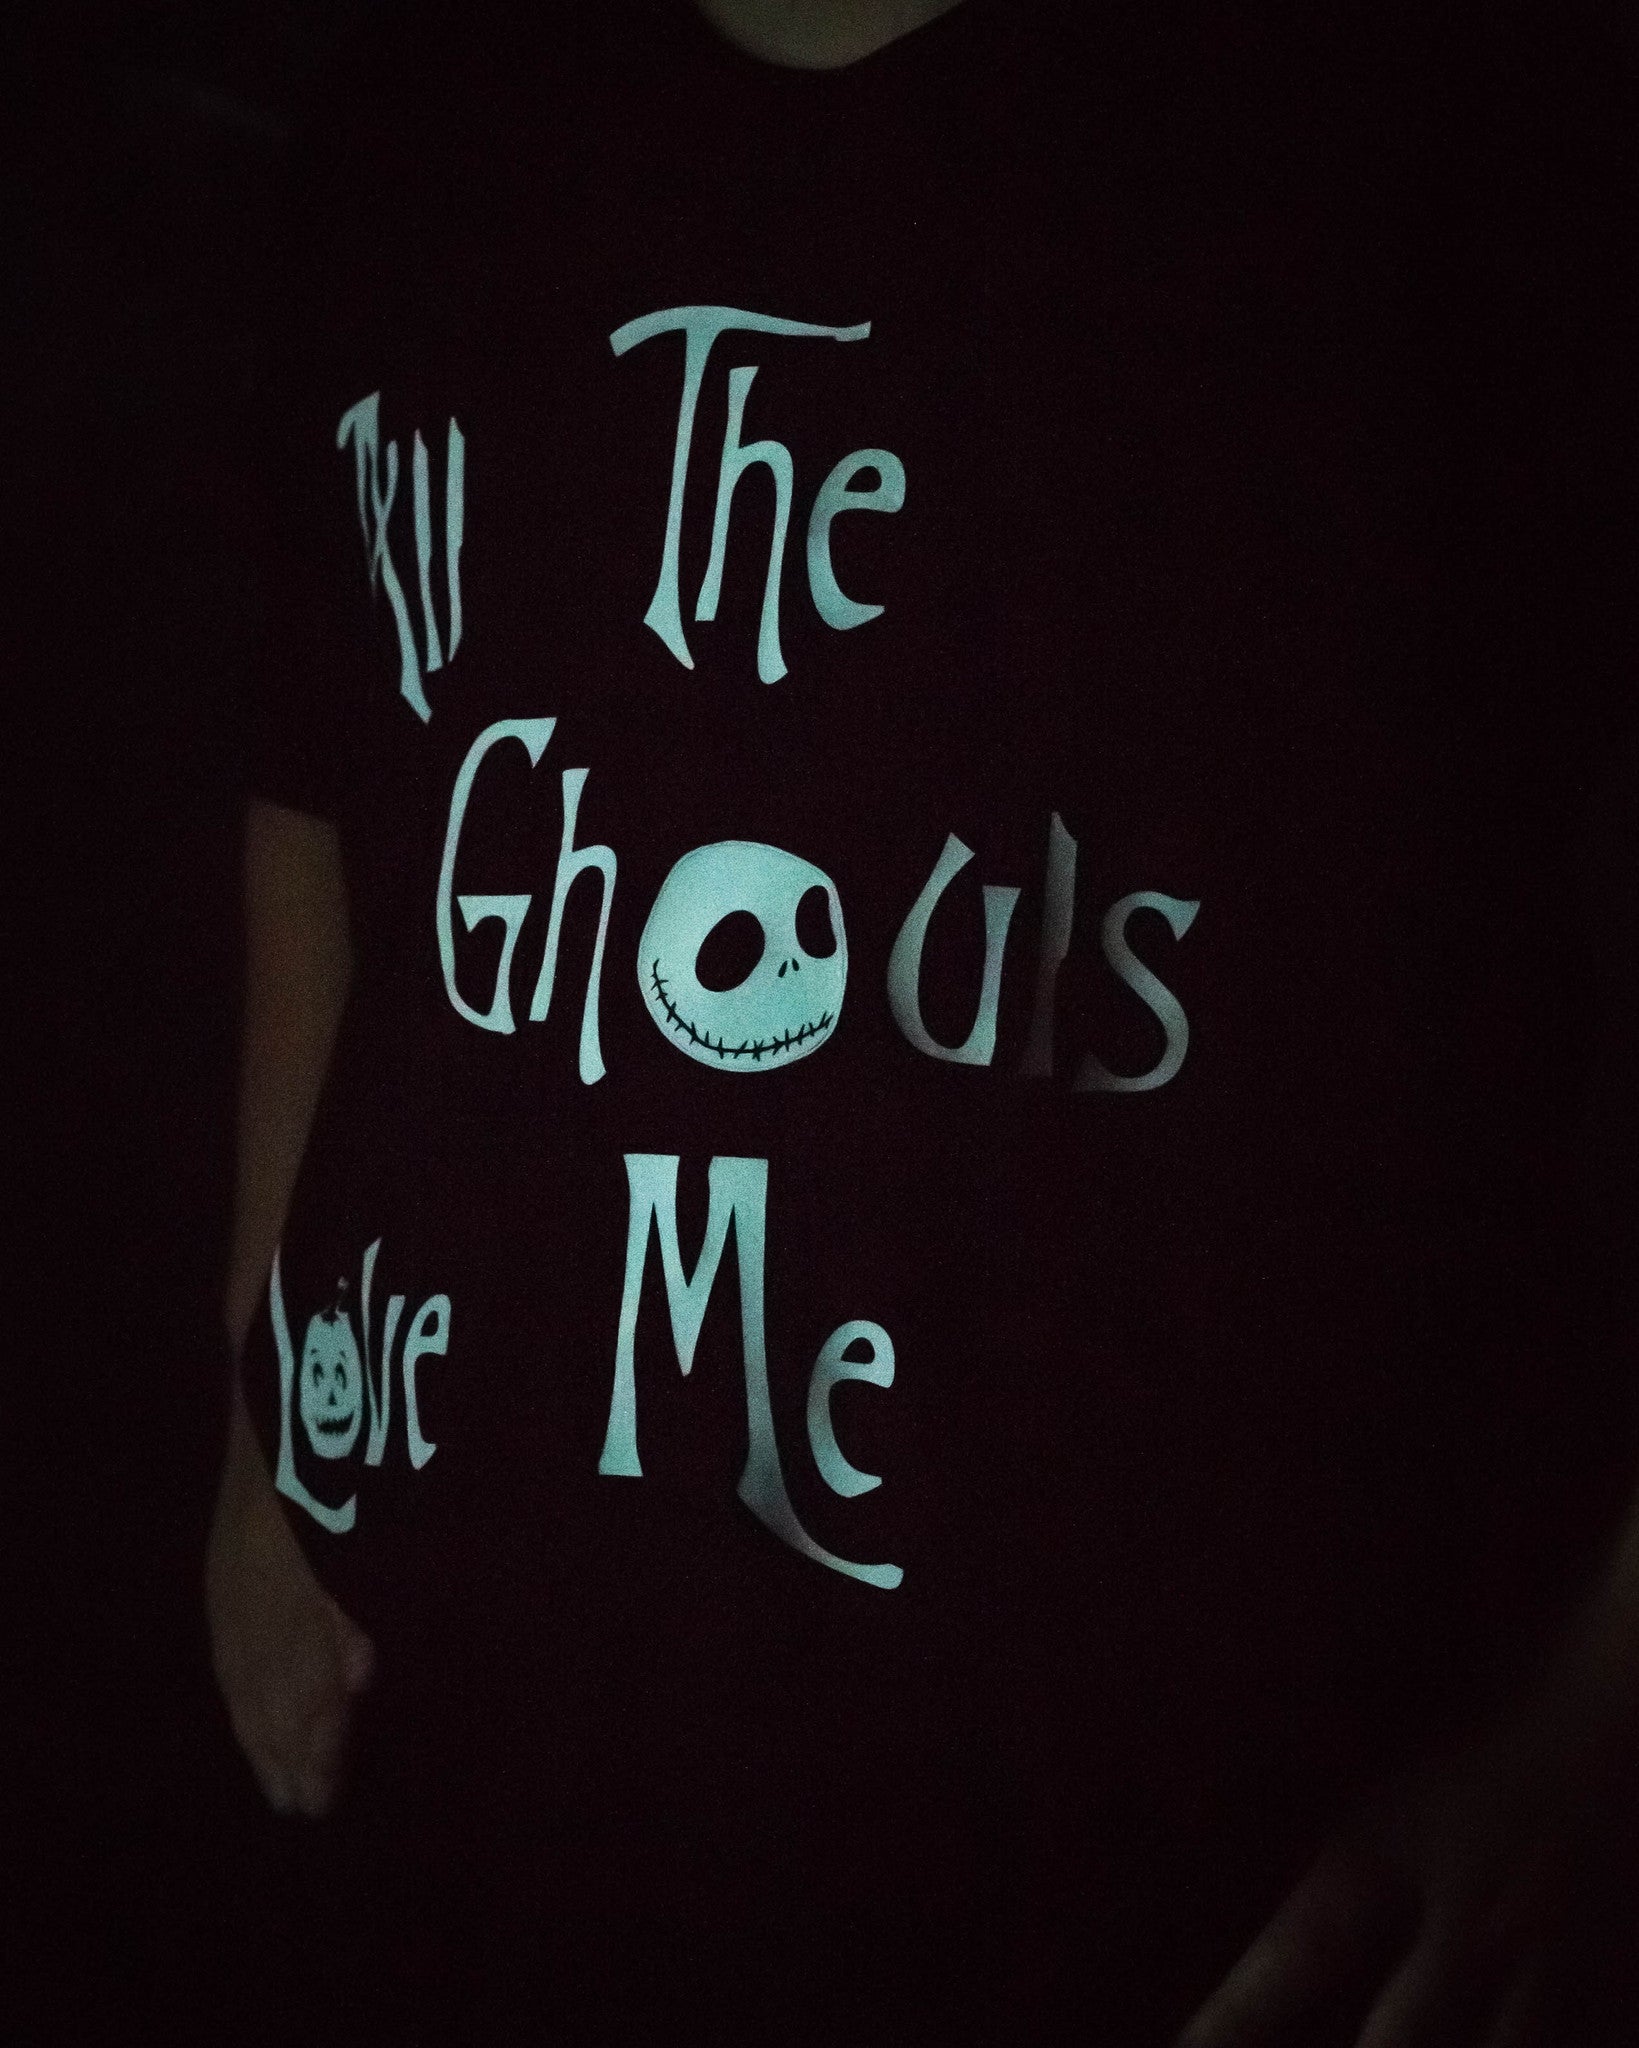 Halloween T-Shirt, All the Ghouls Love Me, GLOW IN THE DARK